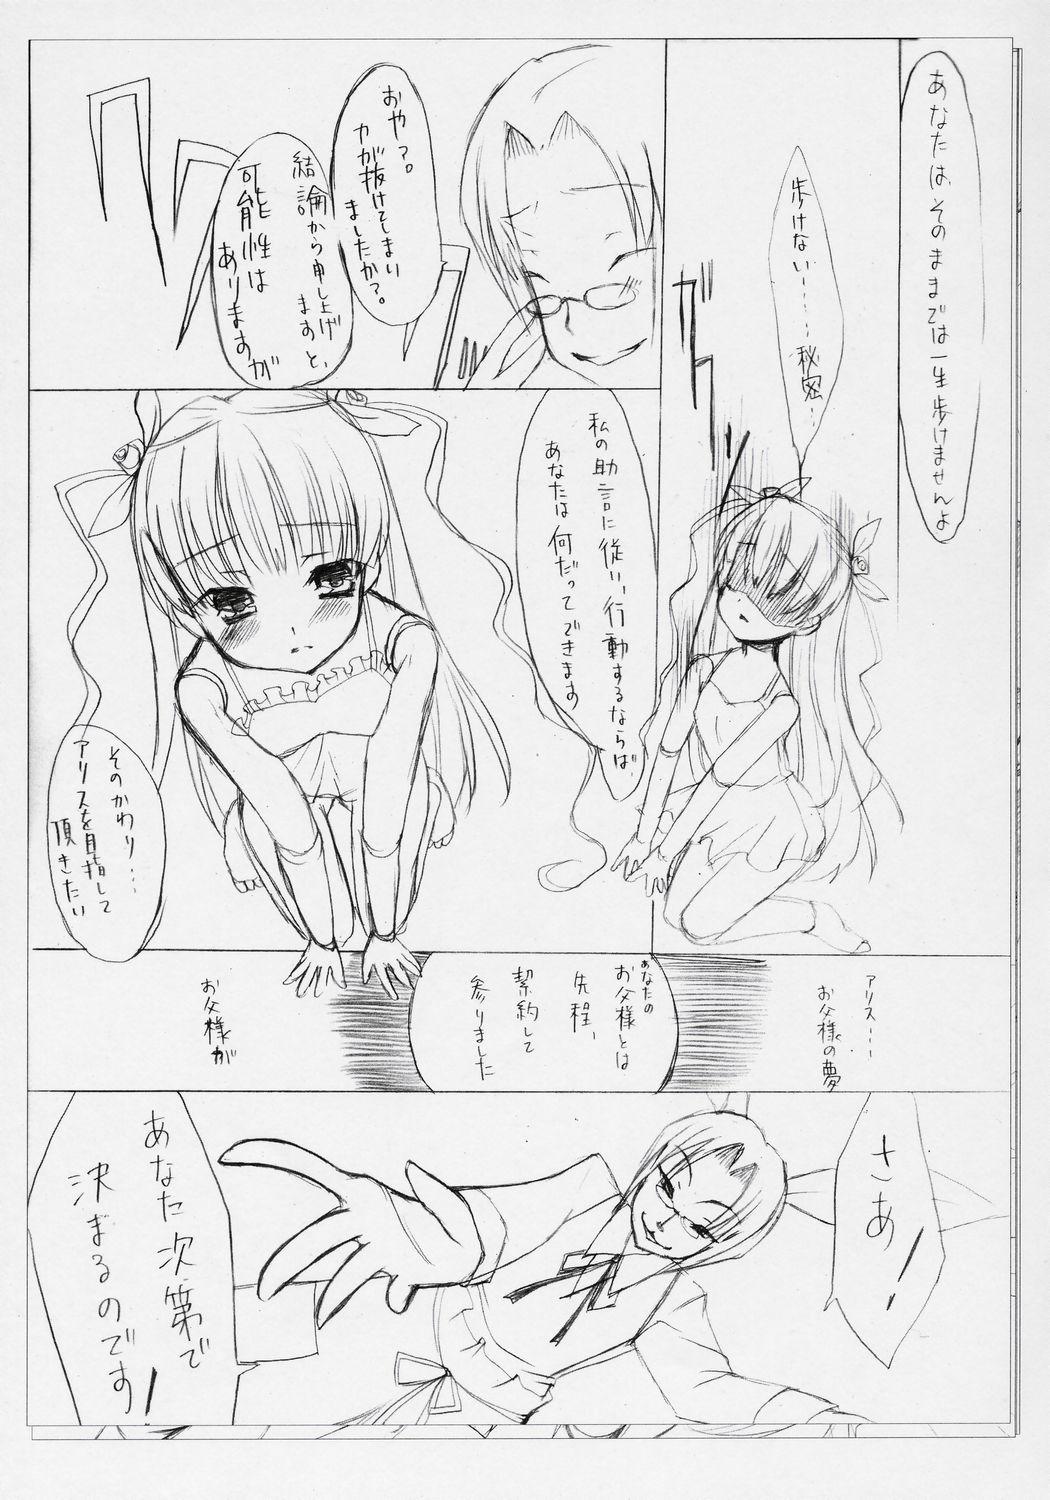 Creampies NEW BORN BABY - Rozen maiden Reverse Cowgirl - Page 6